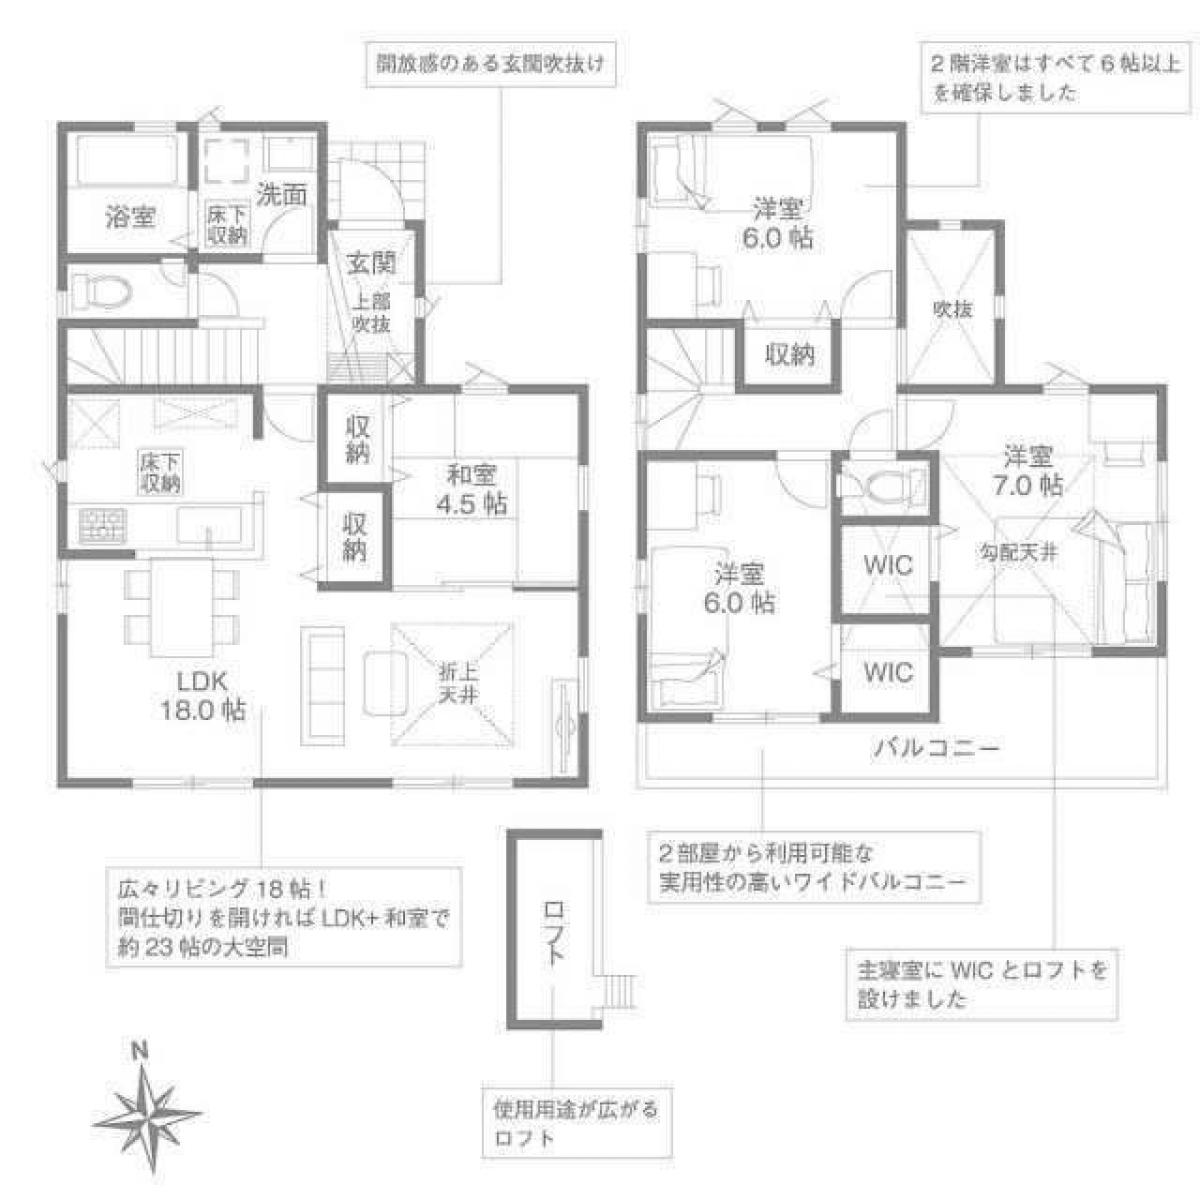 Picture of Home For Sale in Uji Shi, Kyoto, Japan